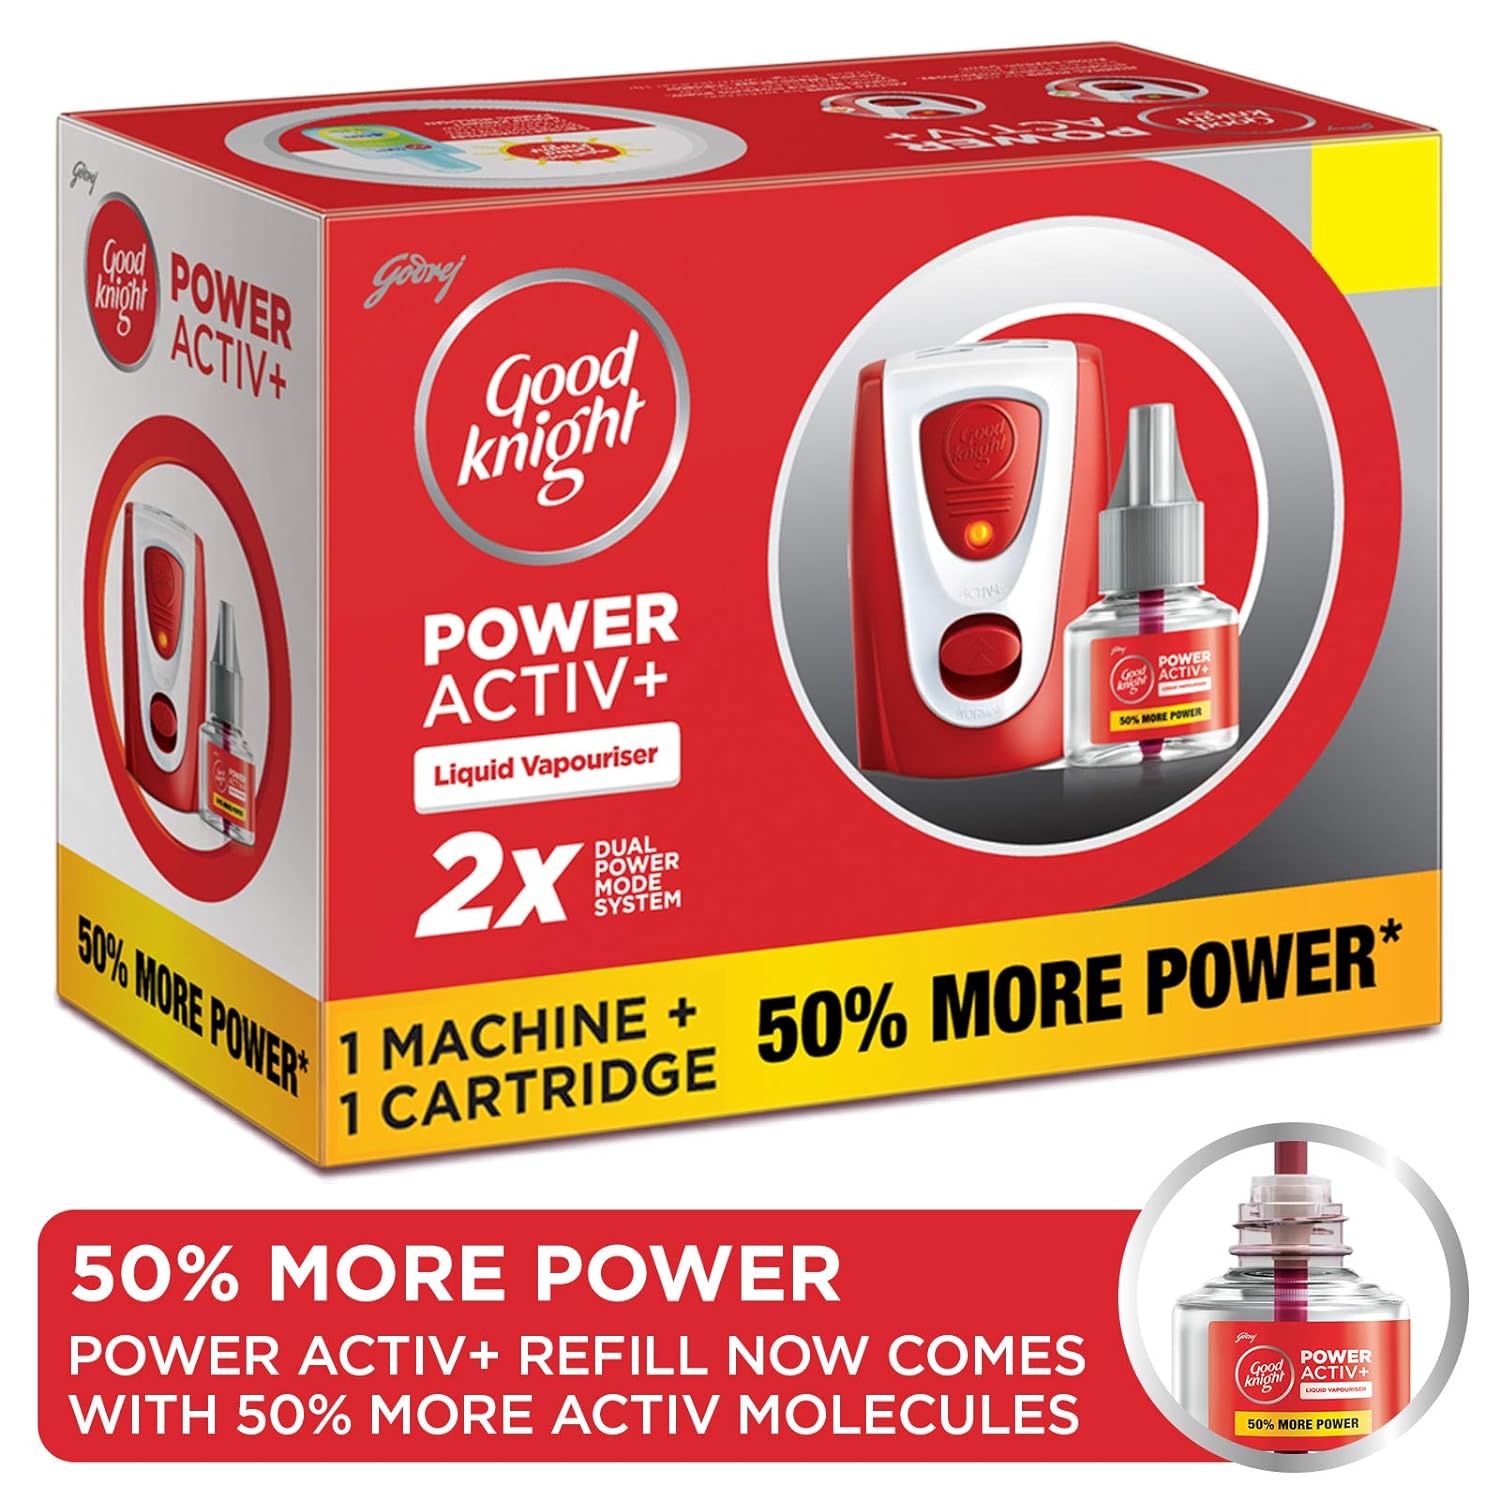 Godrej Good knight Power Activ+ System and Liquid Vapourizer Refill - with 2X Power for Complete Protection | Combo Pack